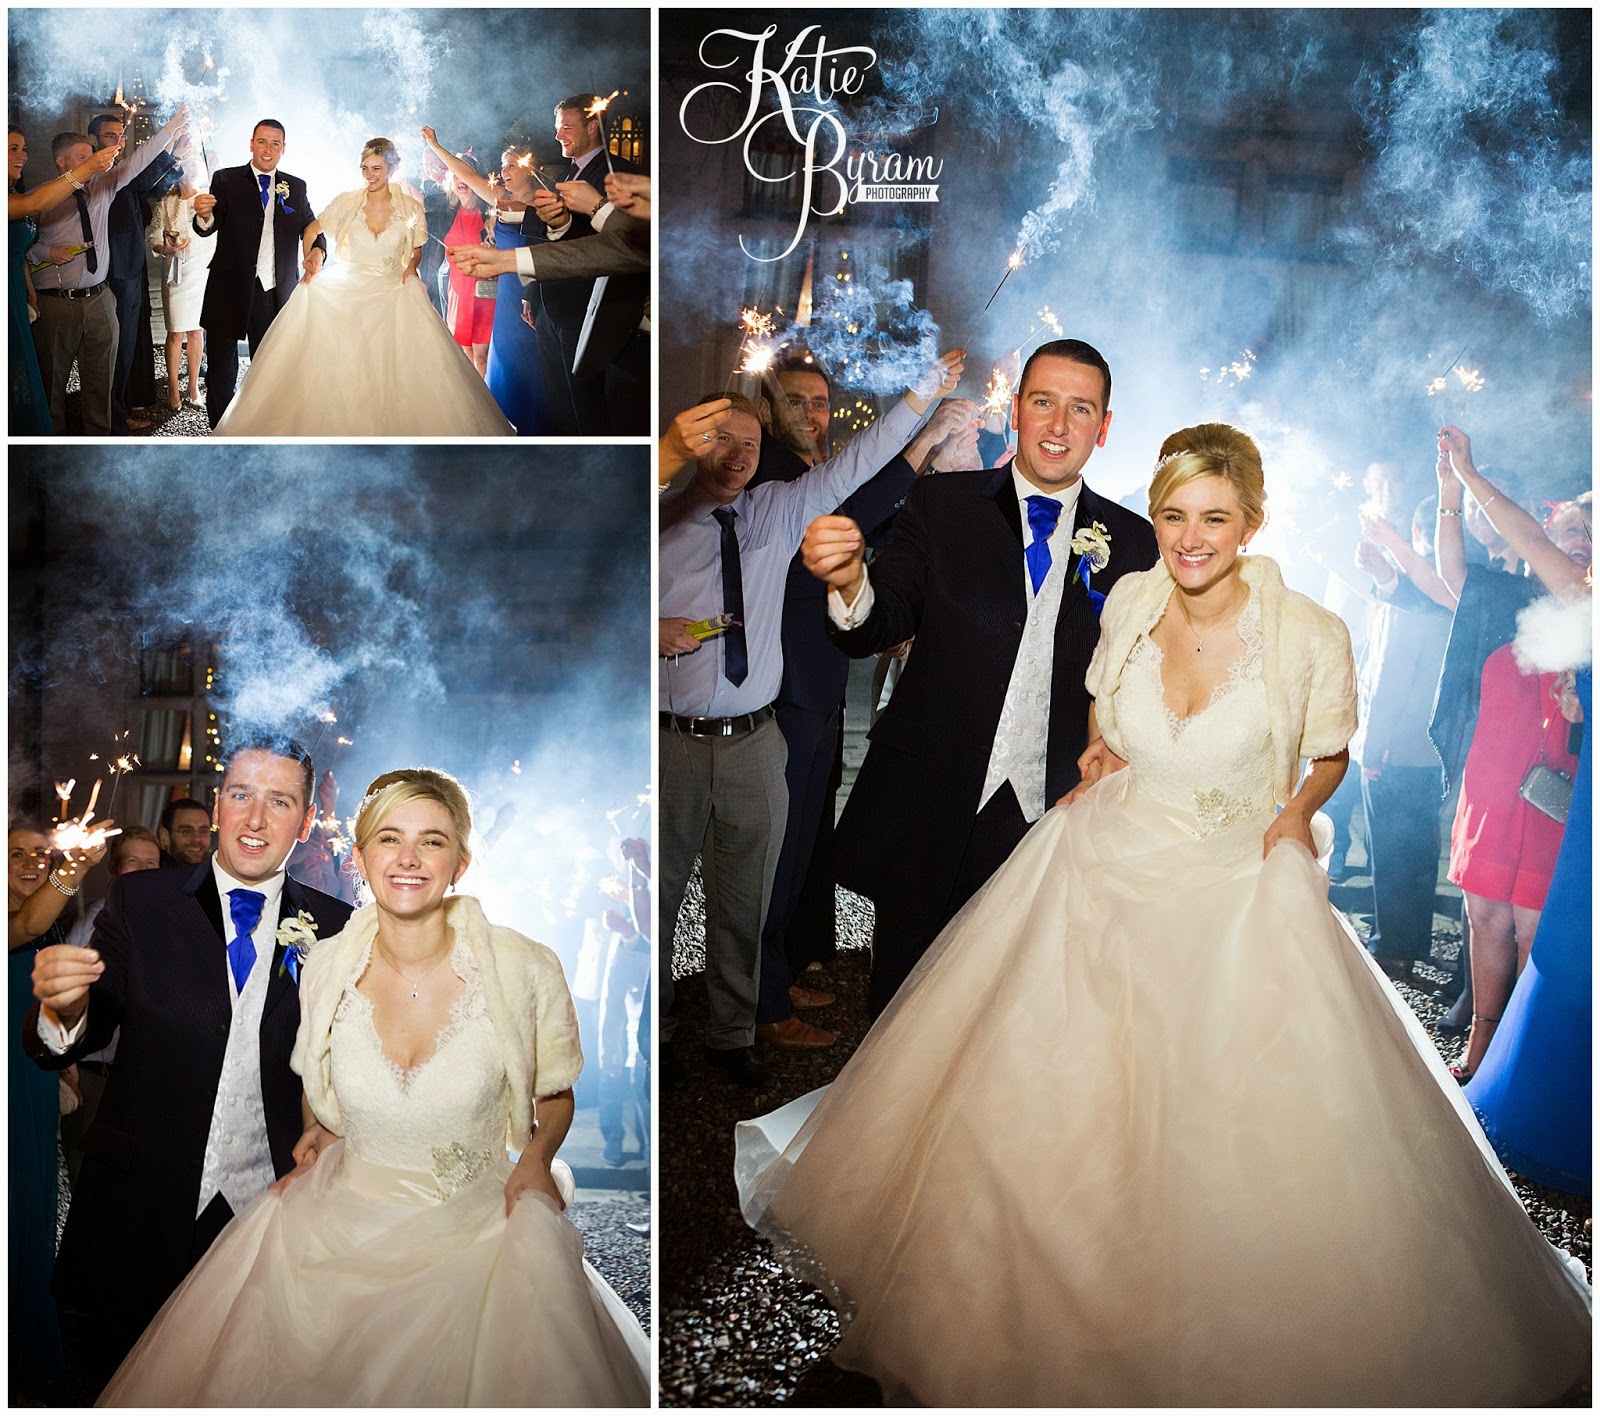 wedding sparklers, bride and groom with sparklers, , ellingham hall, ellingham hall wedding, katie byram photography, alnwick treehouse wedding, alnwick garden wedding, alnwick wedding, 